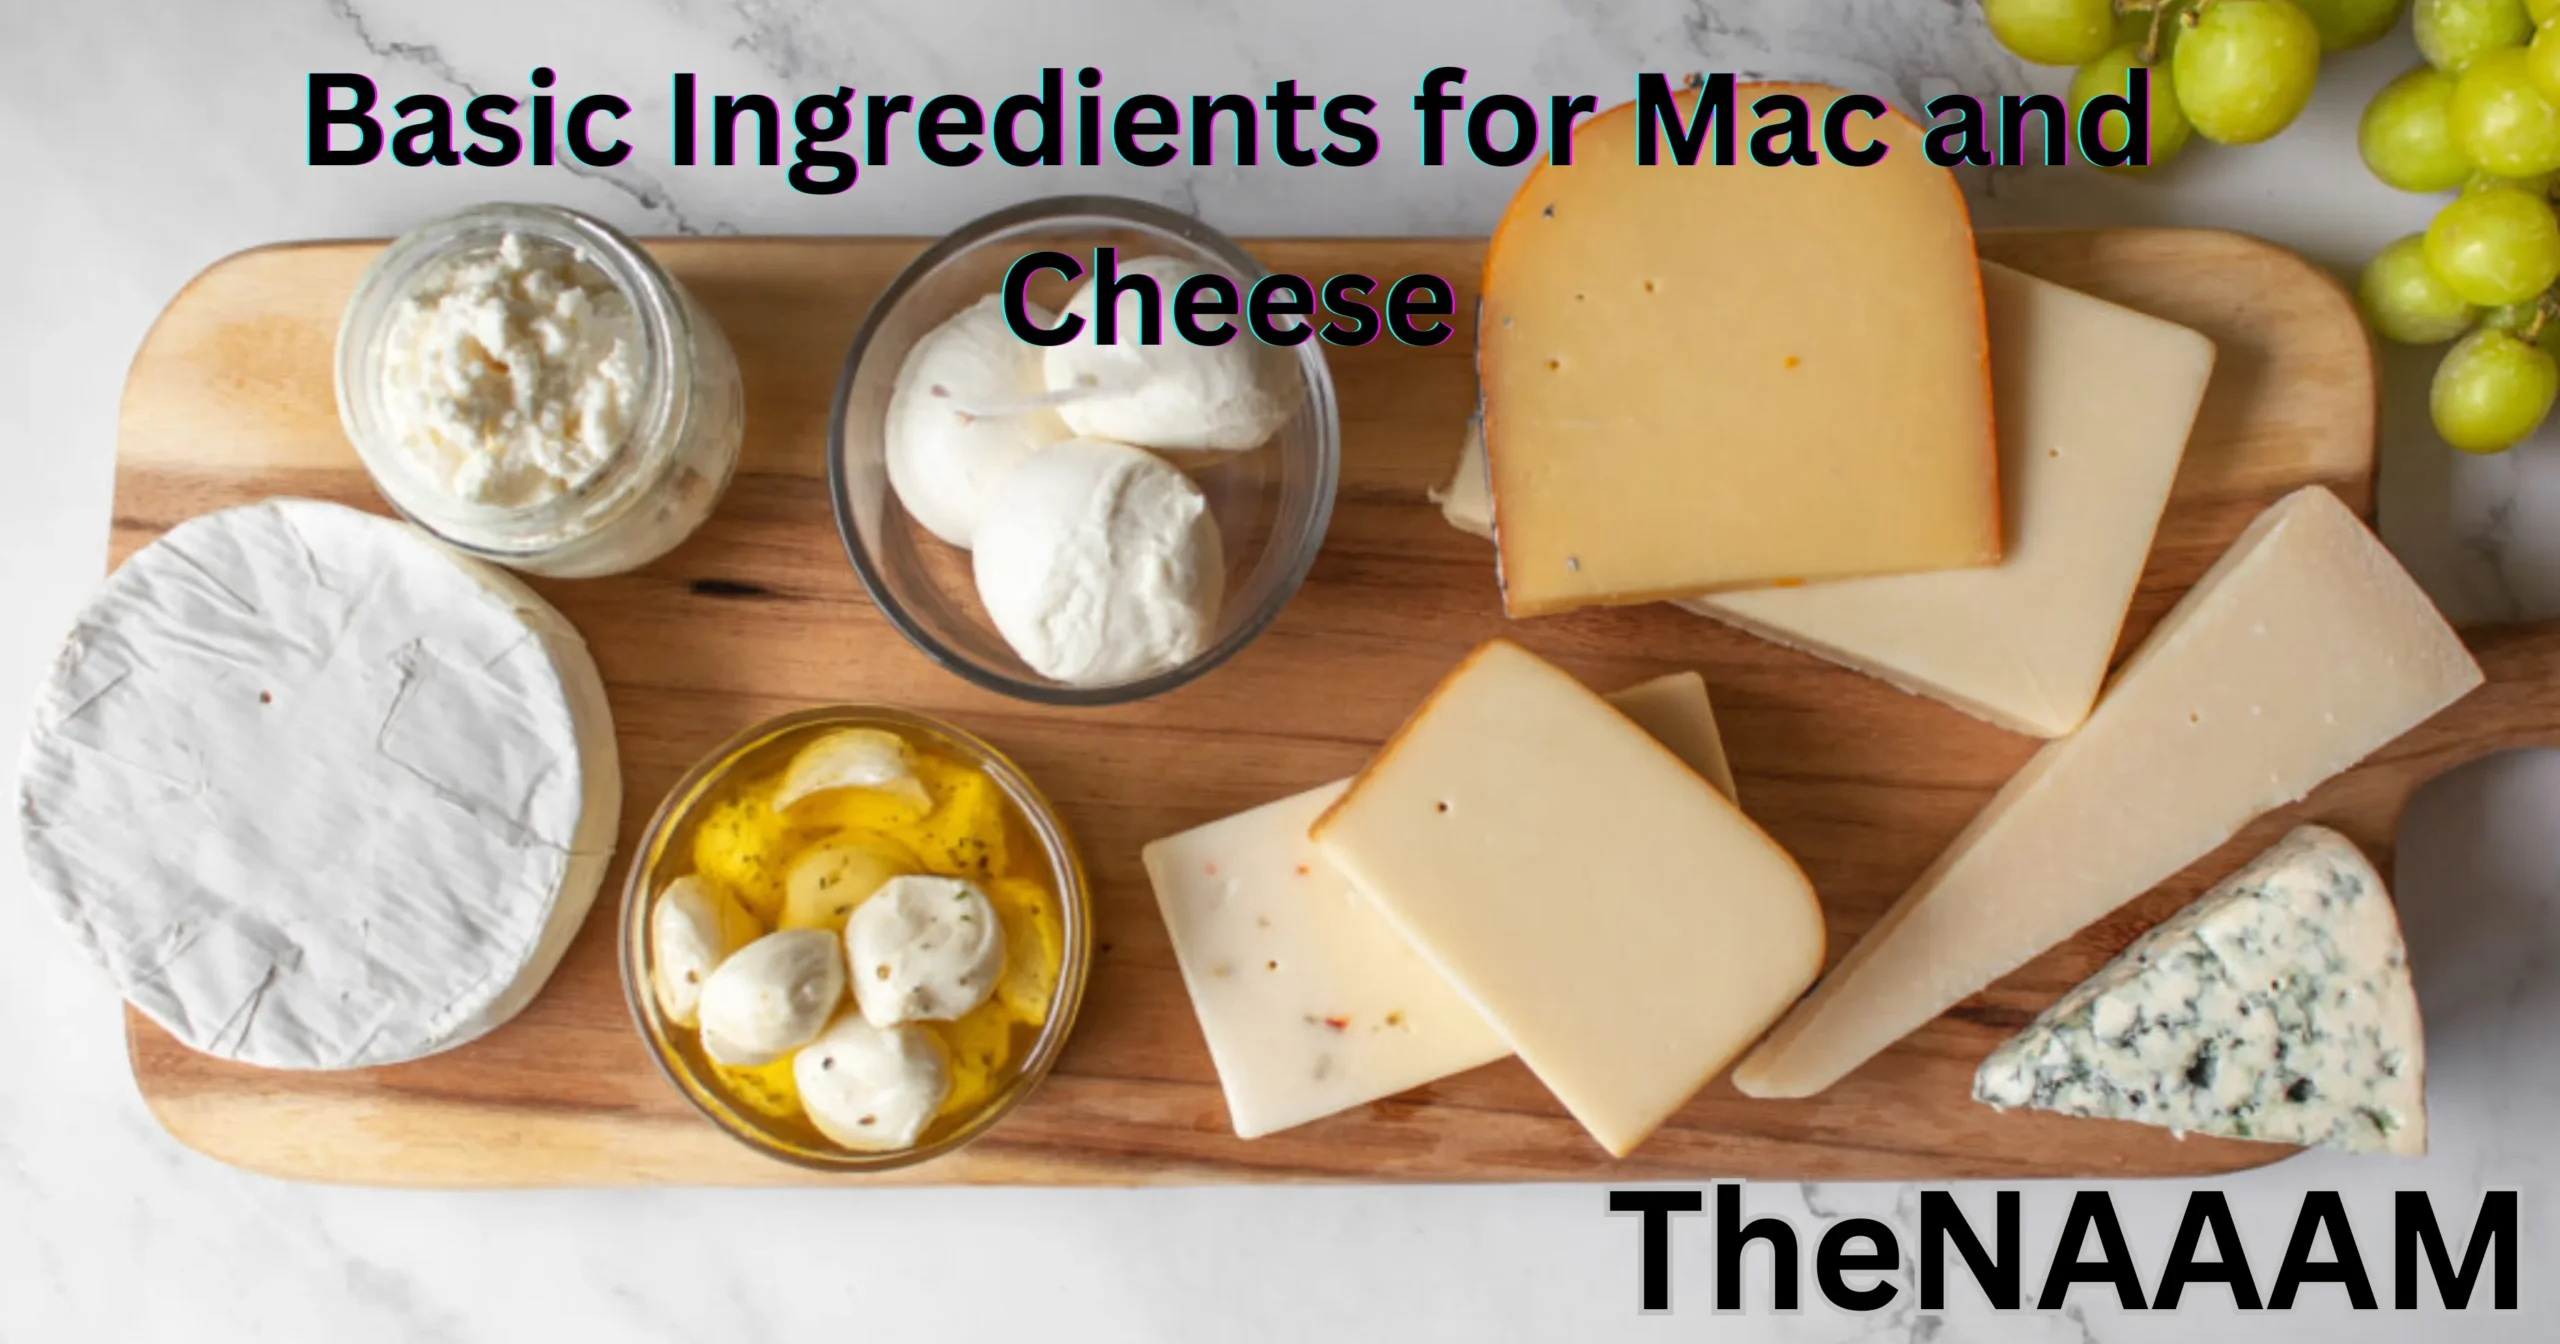 Basic Ingredients for Mac and Cheese